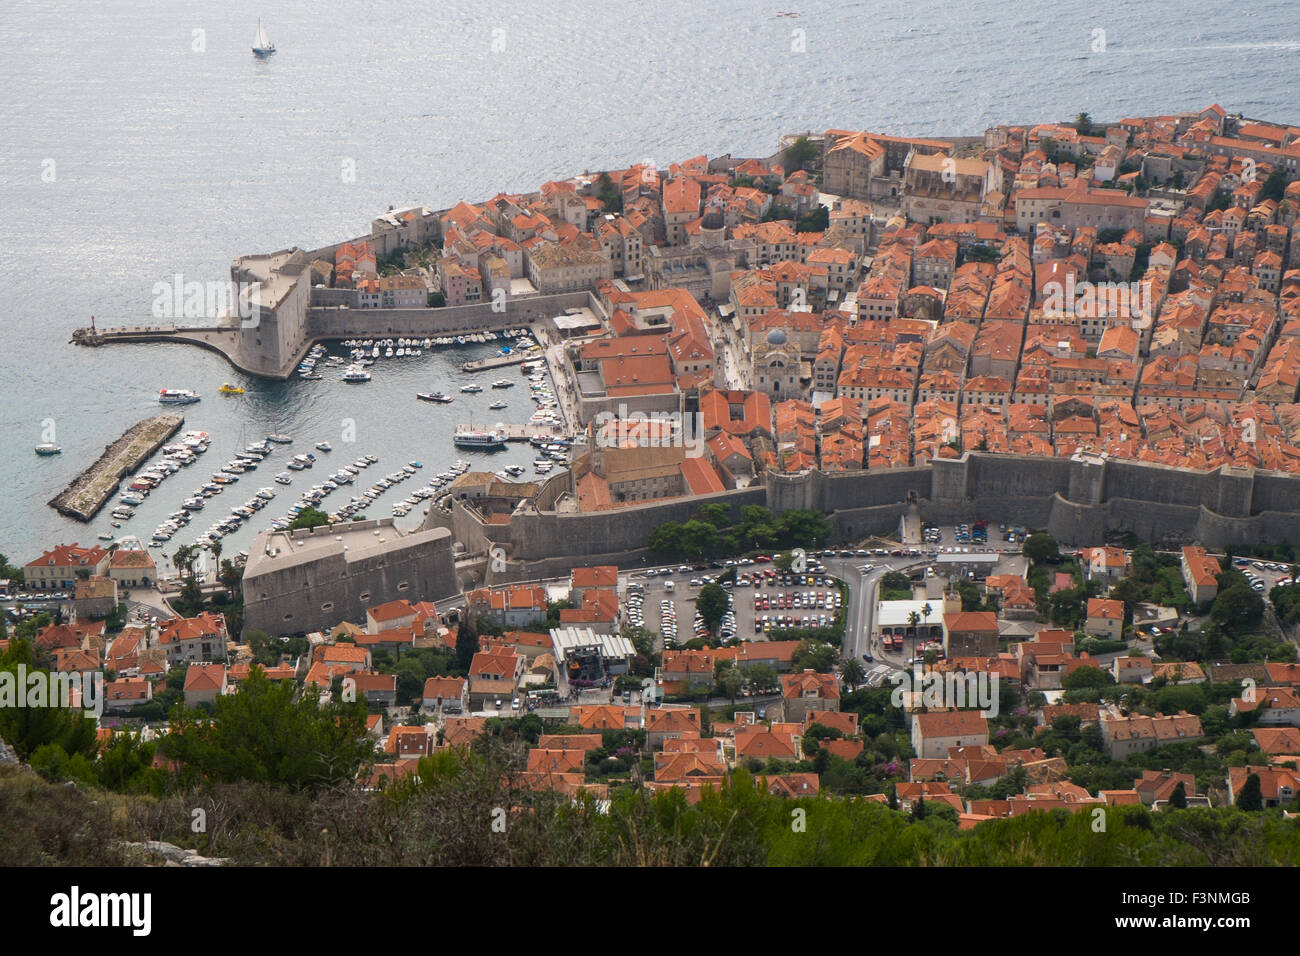 The Old City of Dubrovnic from Mount Srd. Stock Photo